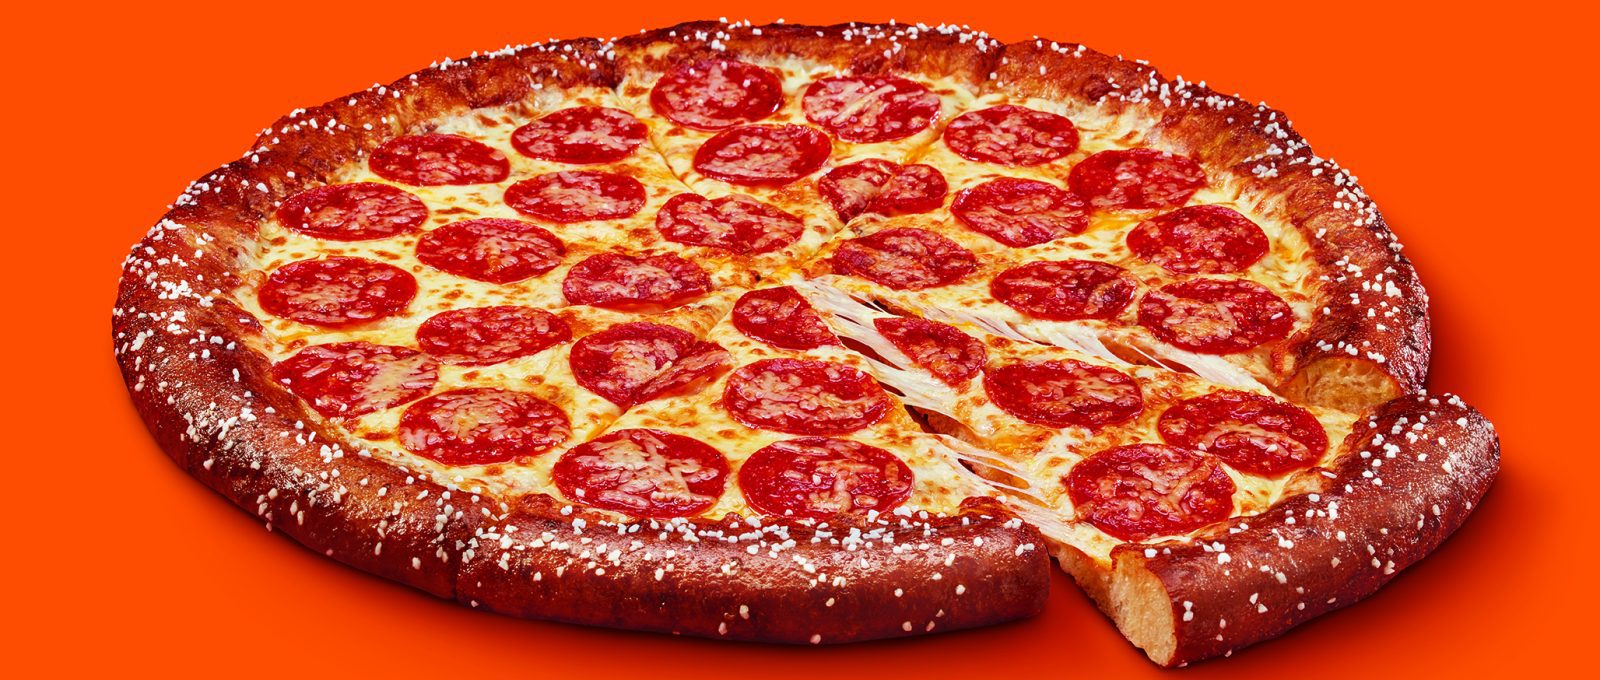 Little Caesars Puts Corny Twist on Highly Anticipated ReLaunch of